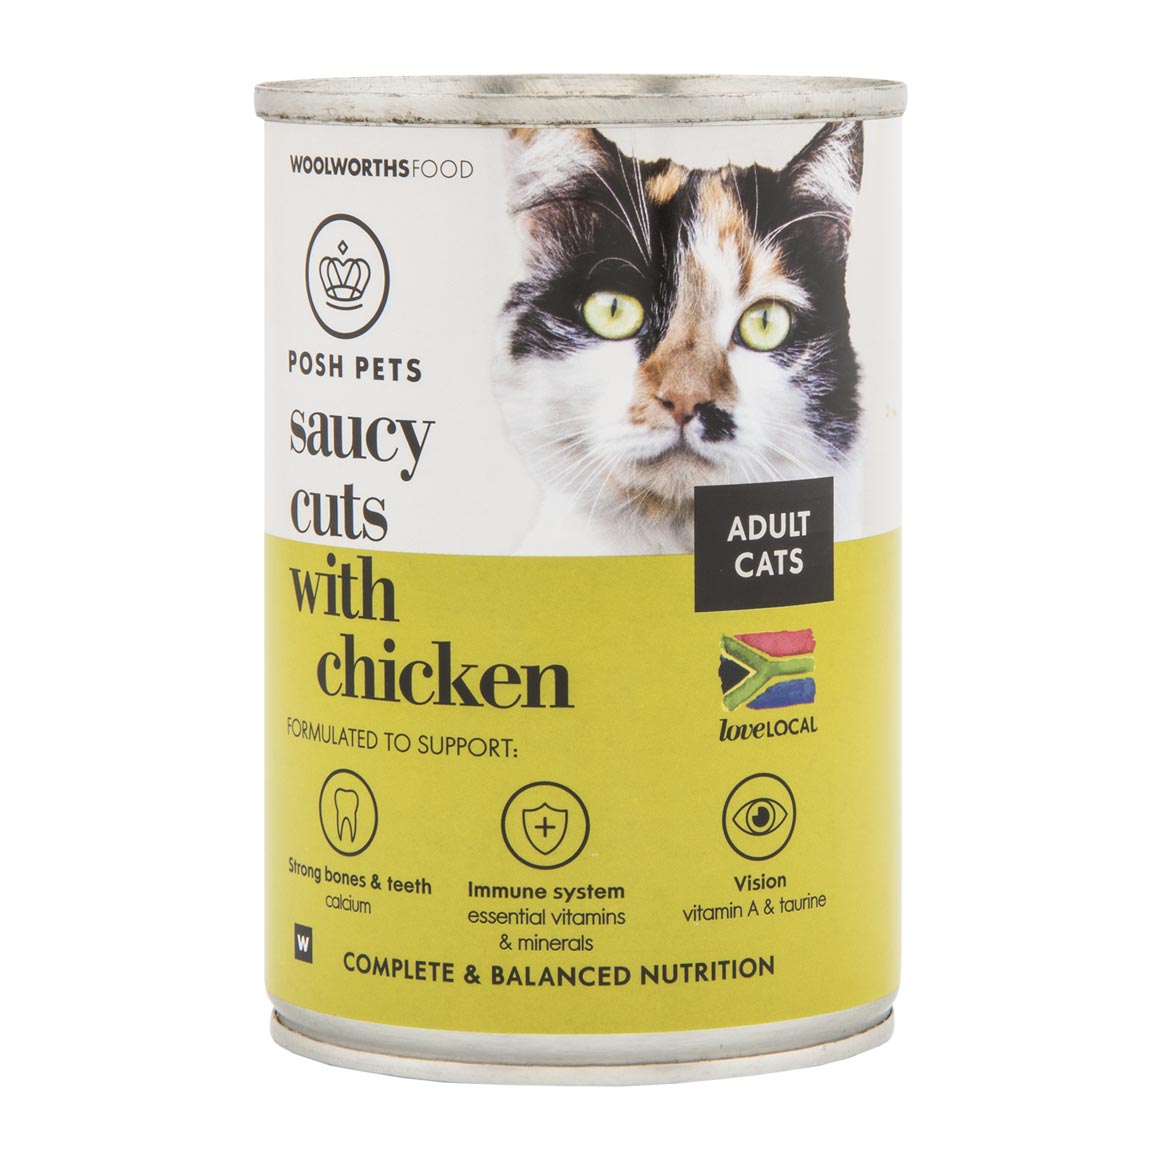 Posh Pets Saucy Cuts with Chicken | Woolworths.co.za